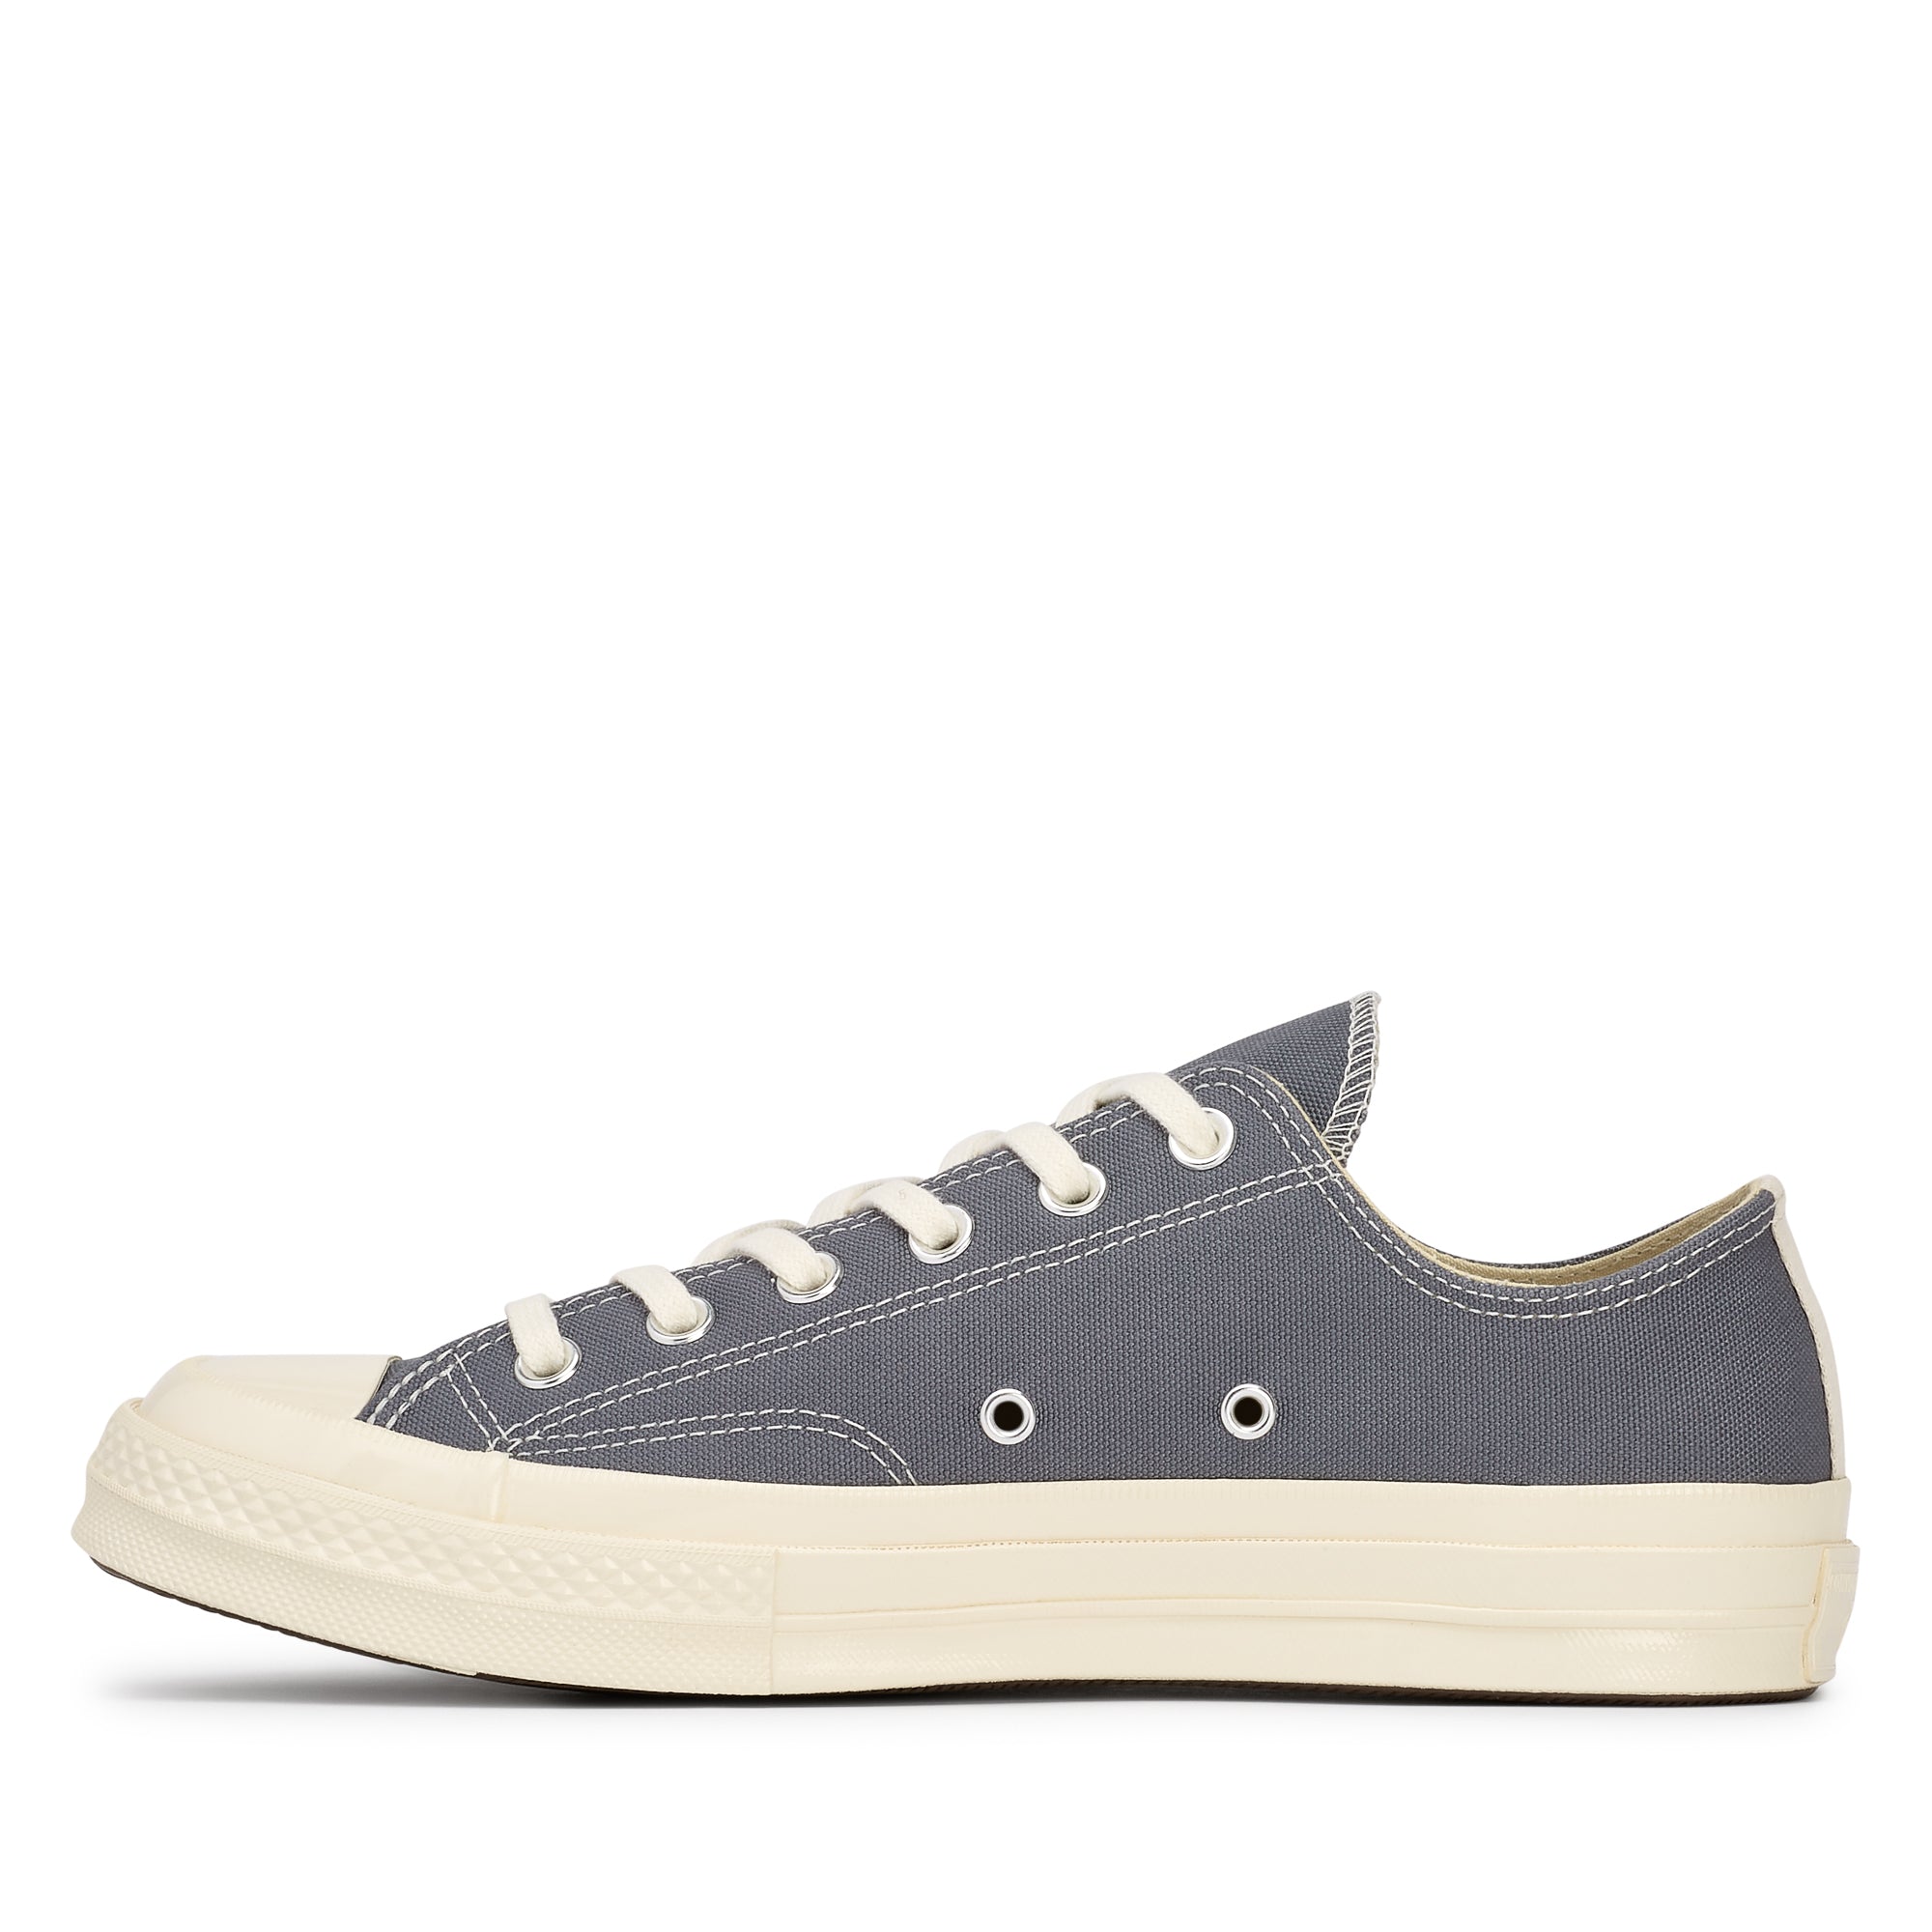 Play Converse - Black Heart Chuck Taylor All Star ’70 Low Sneakers - (Grey) view 2